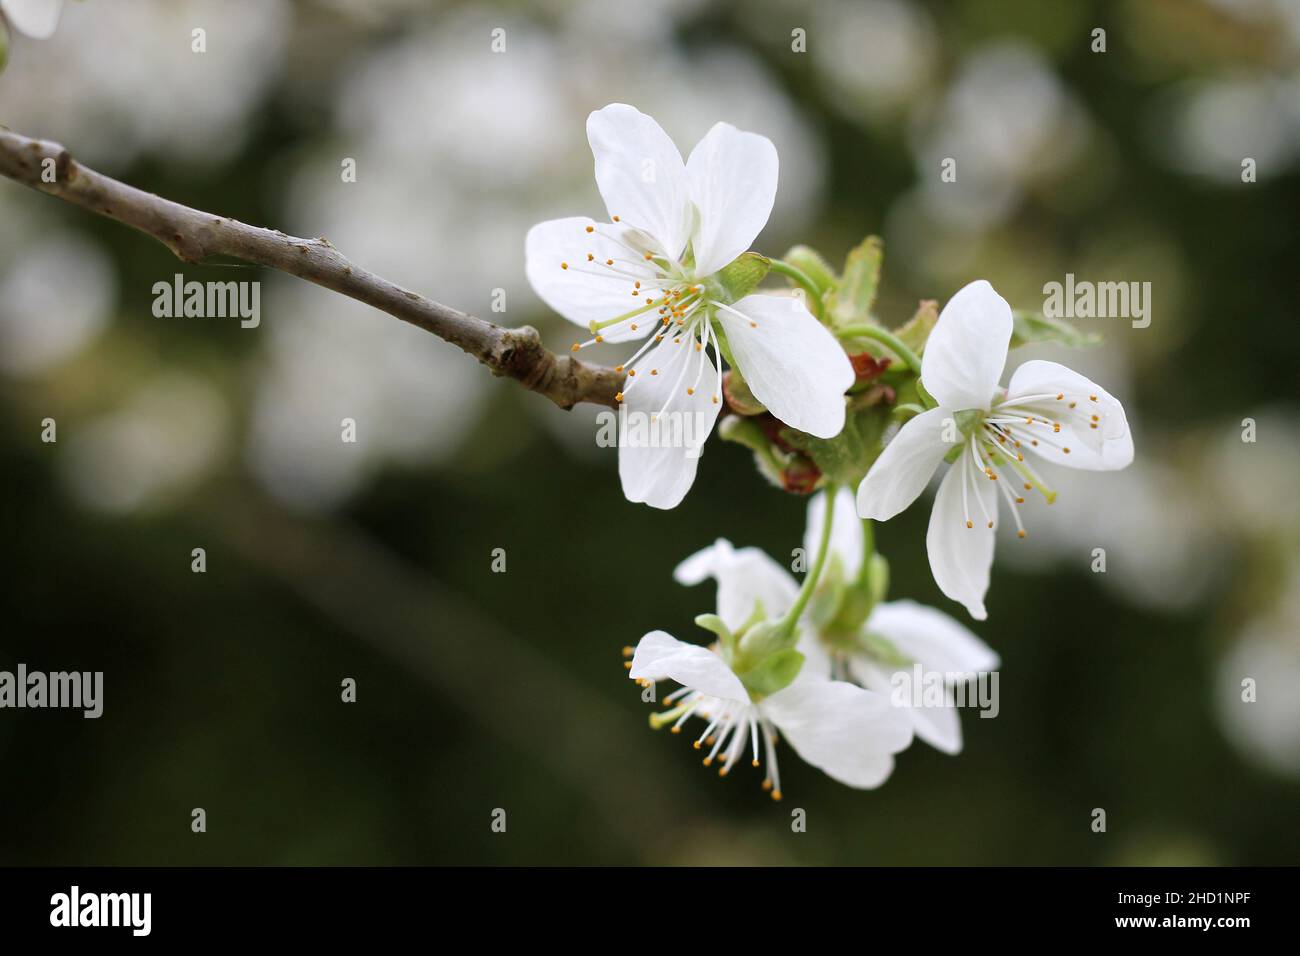 Cherry tree branch in bloom at a garden. Stock Photo